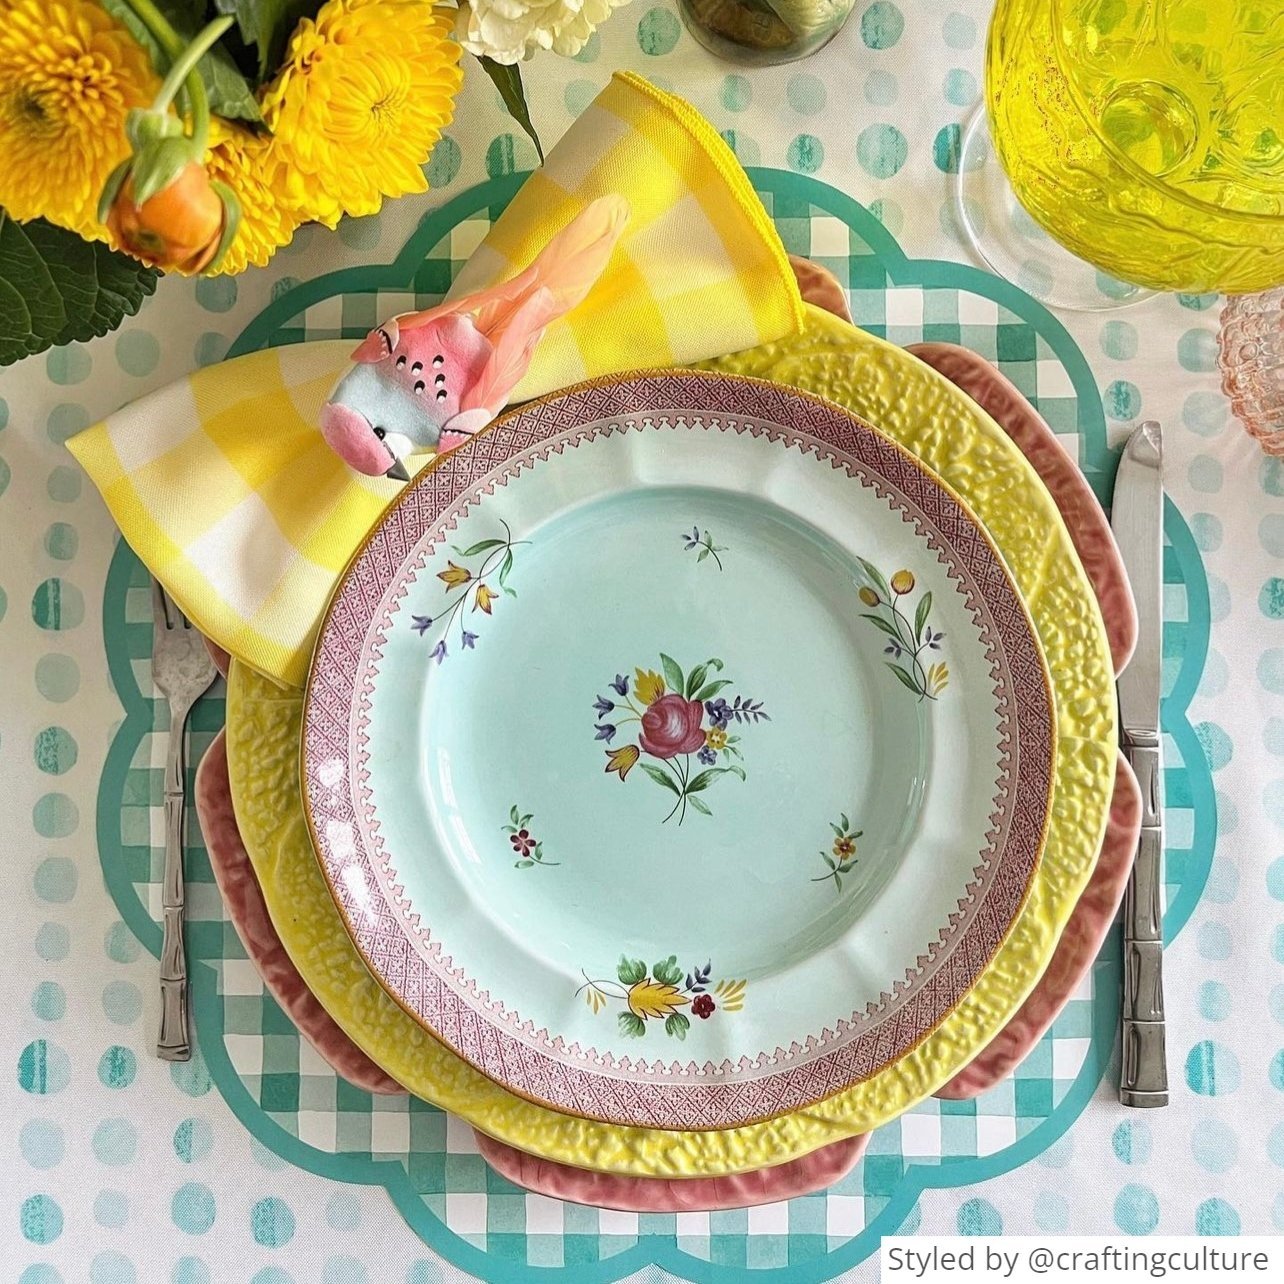 Place setting with green gingham scalloped round paper placemat layered with yellow, pink and white dishes with a yellow napkin tied into a bow